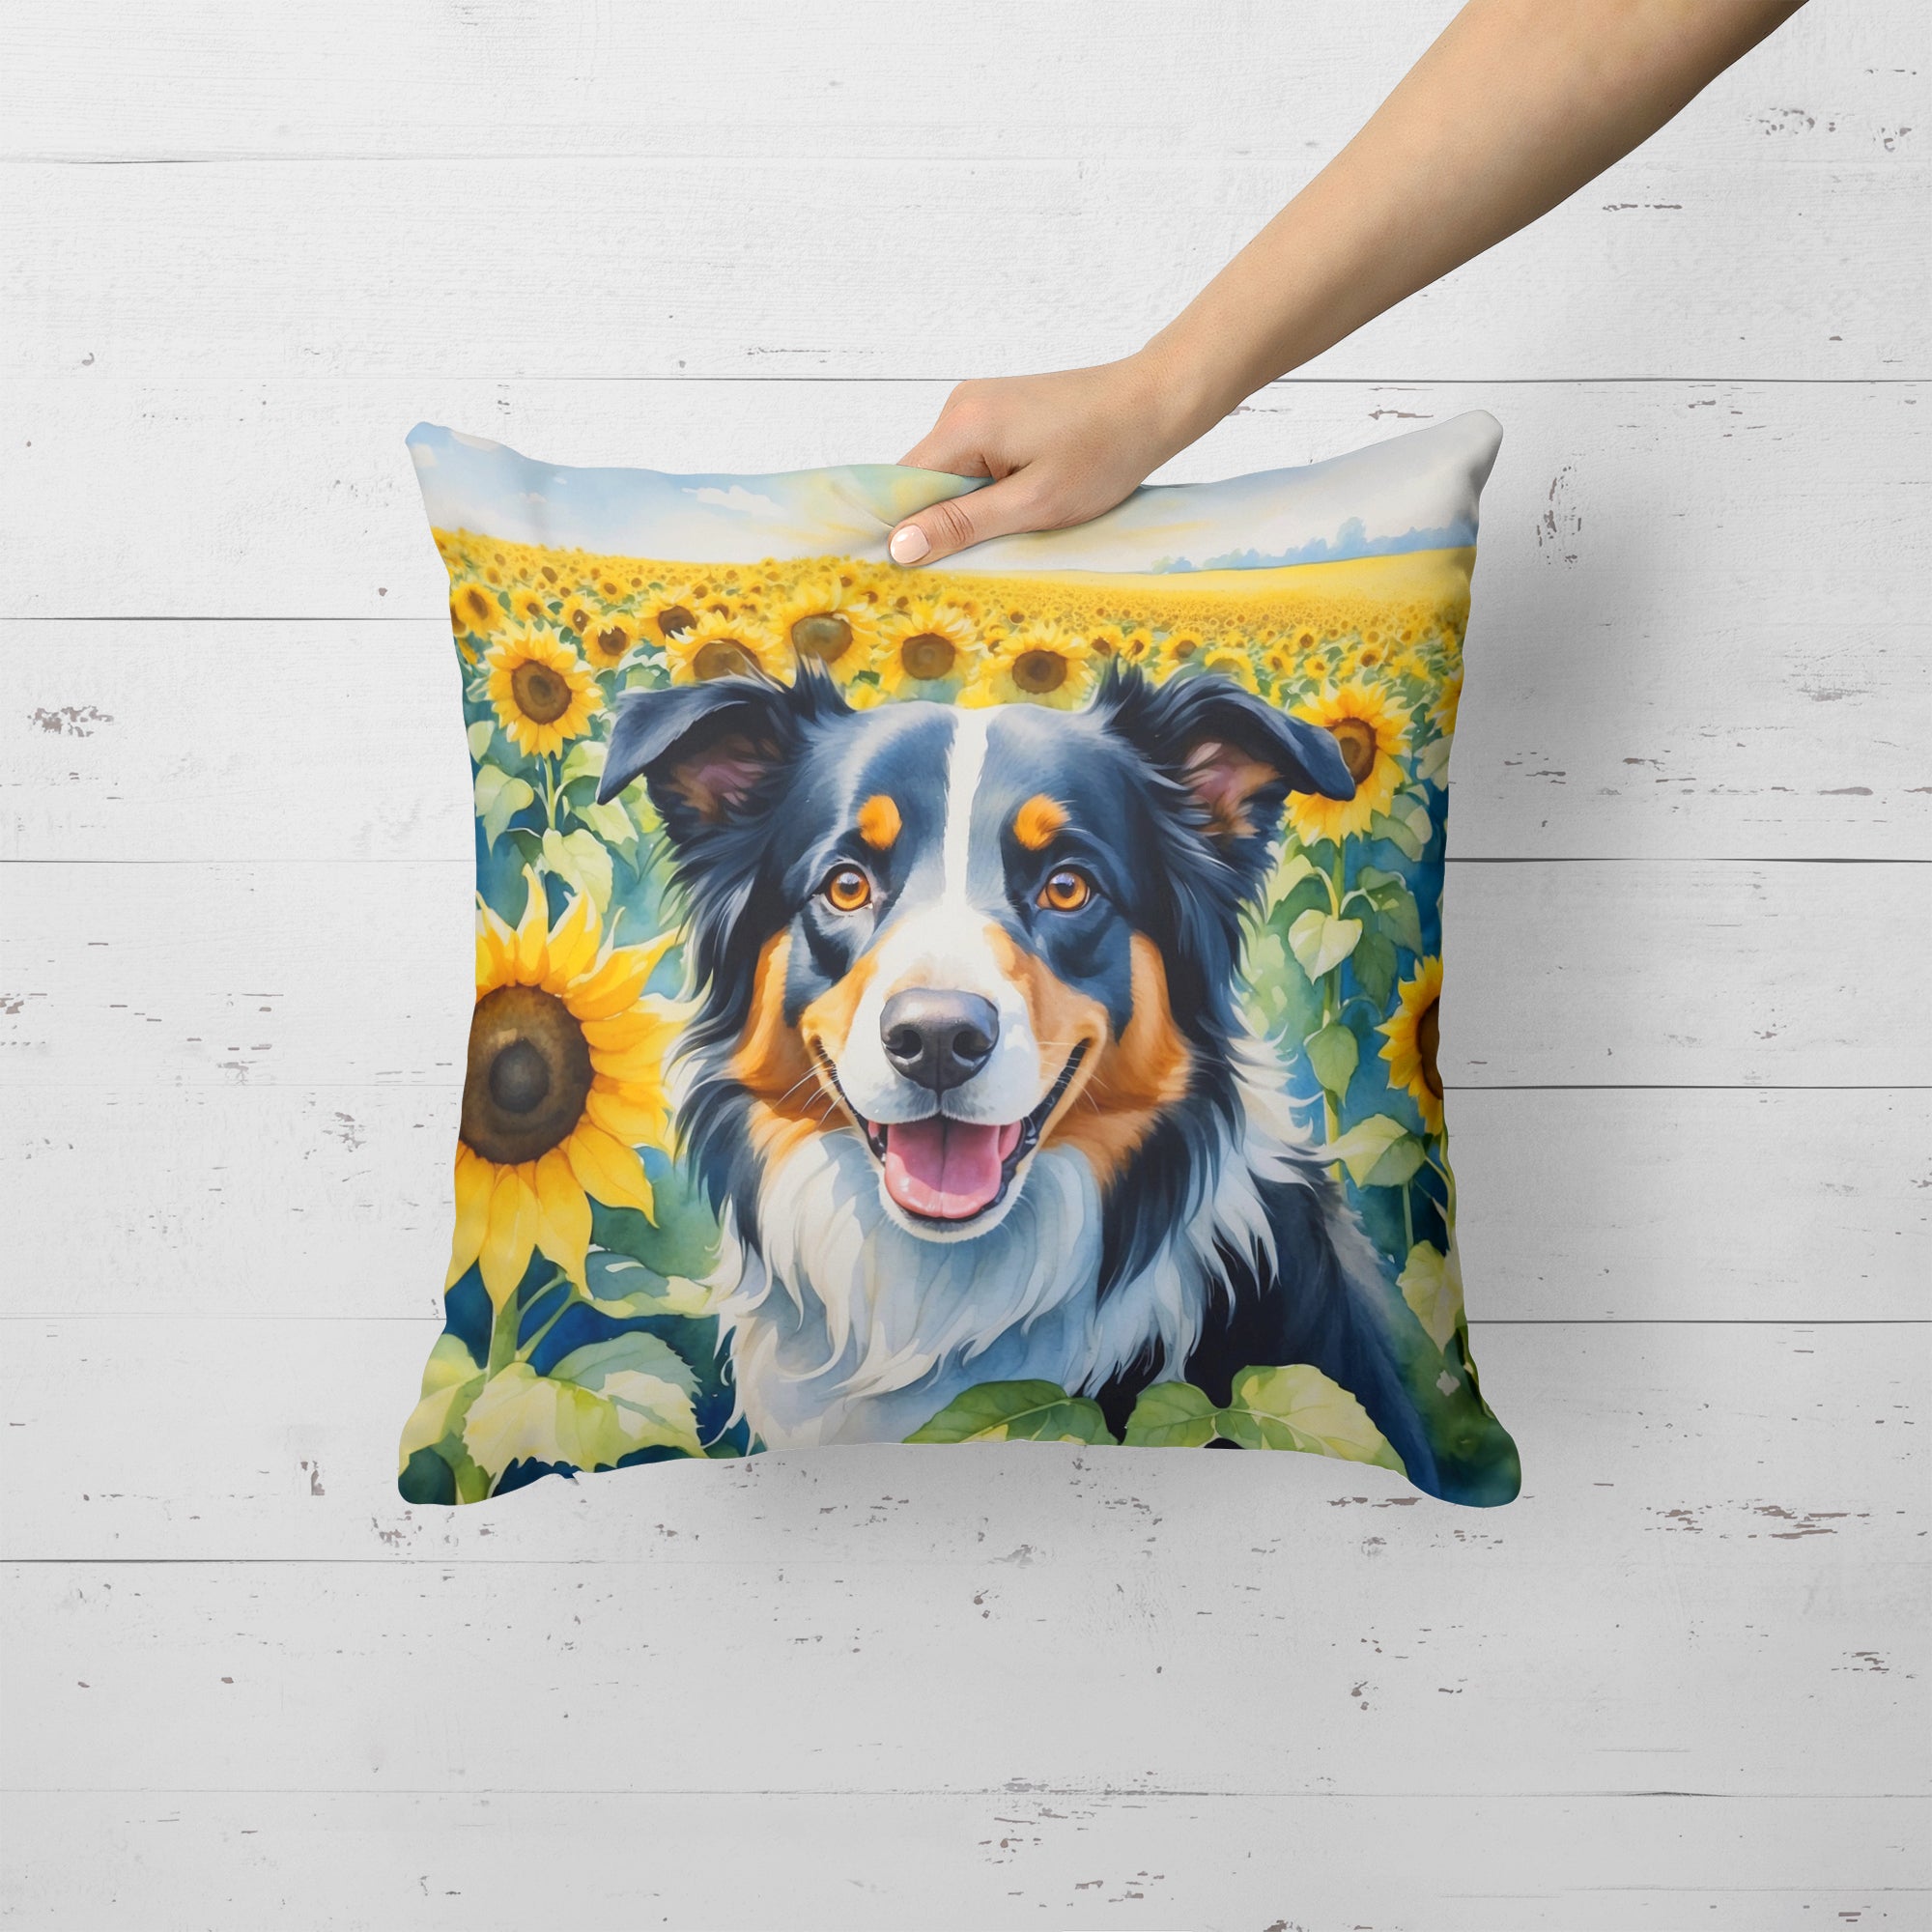 Buy this Border Collie in Sunflowers Throw Pillow